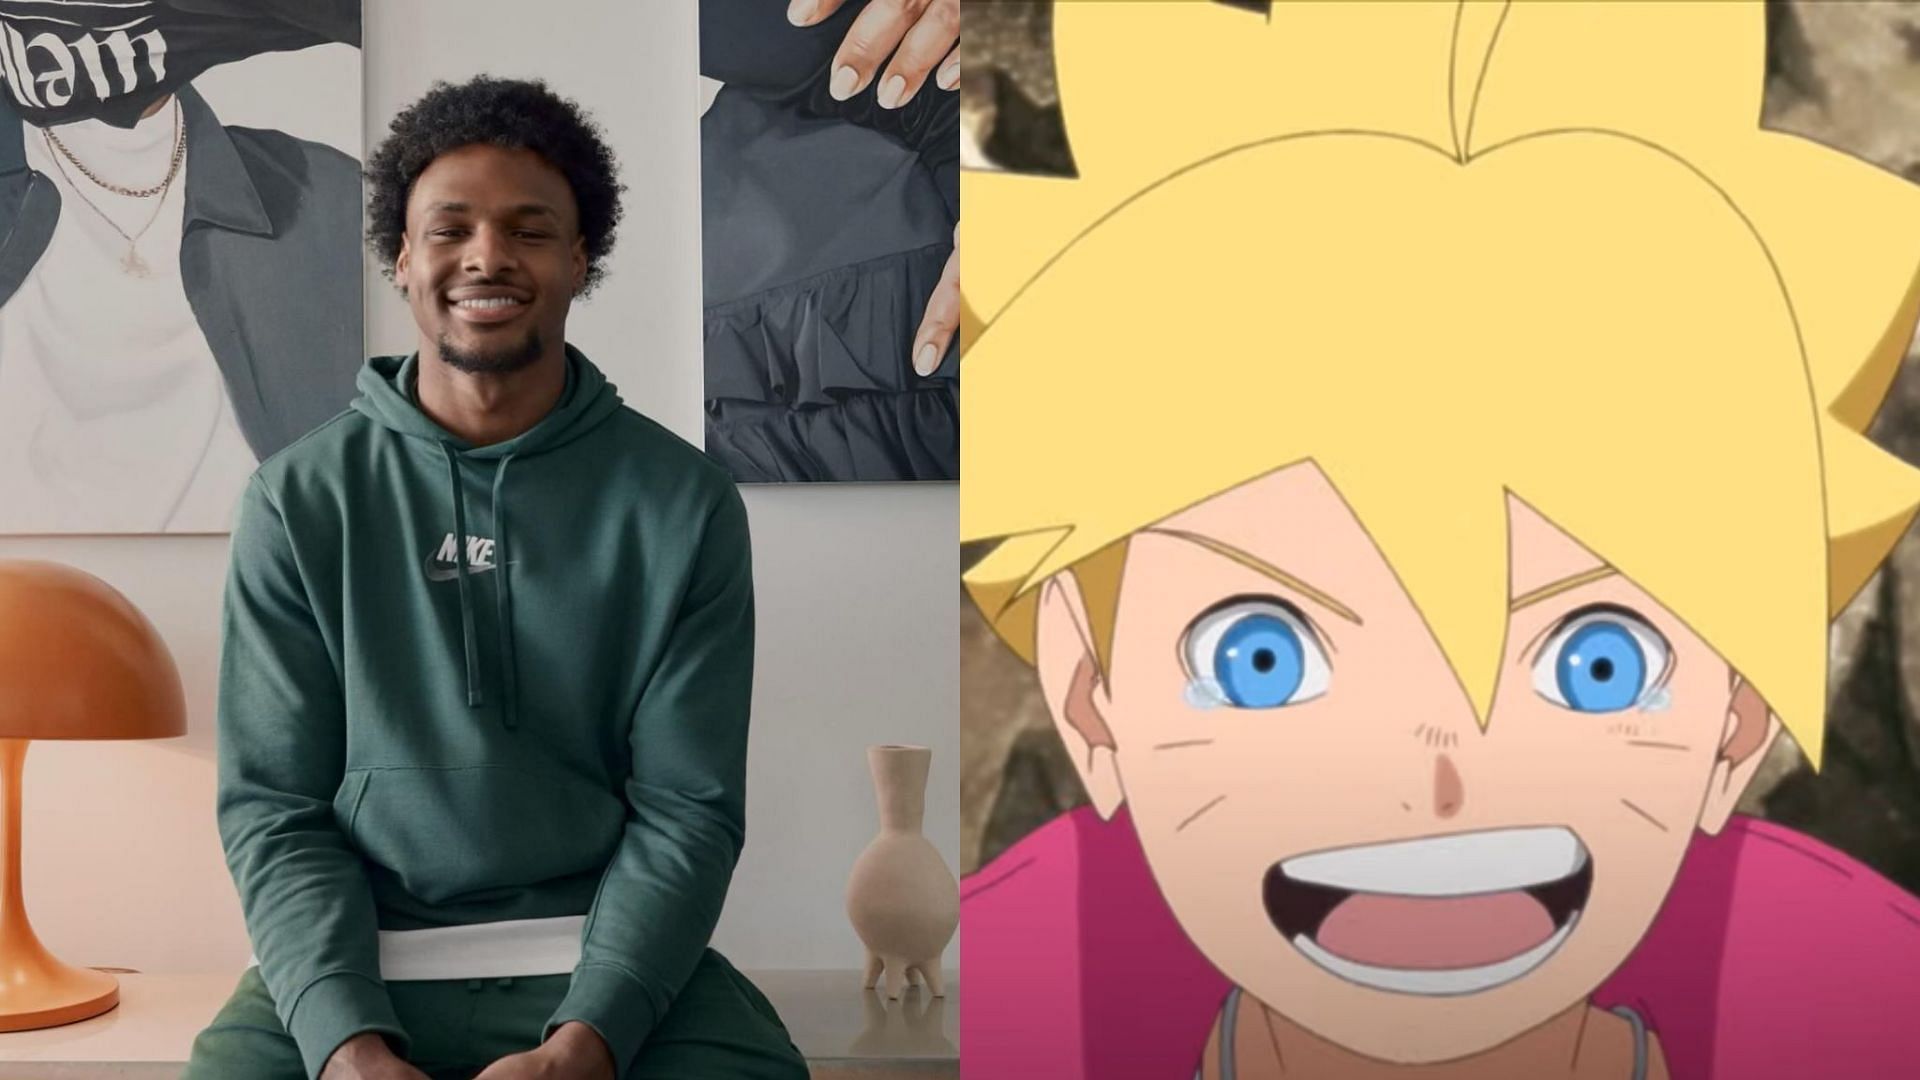 NBA fans liken Bronny James to iconic anime character amid ongoing draft speculations